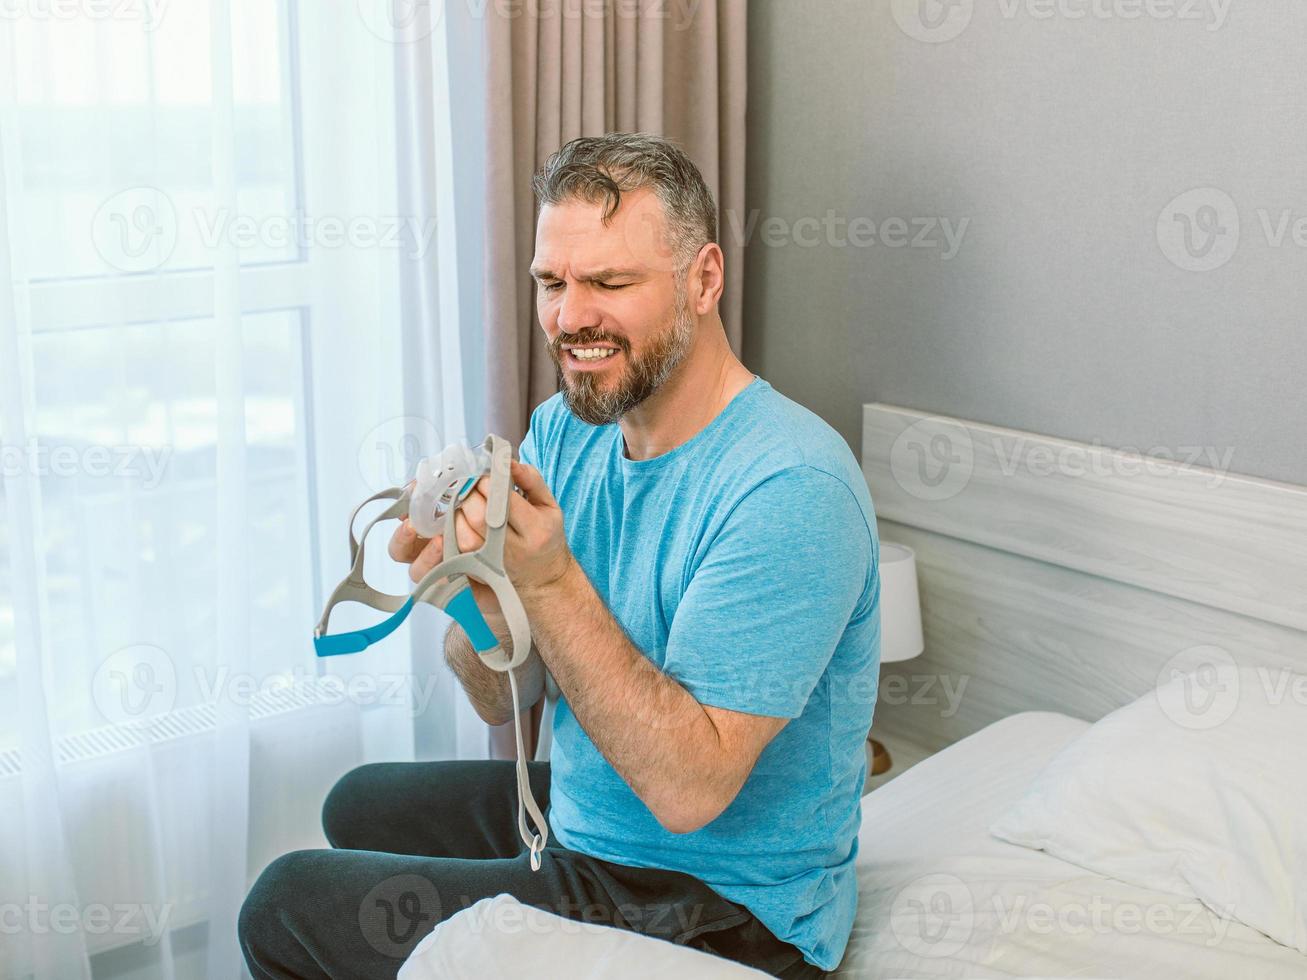 Mature happy man with chronic breathing issues considers using CPAP machine sitting on the bed in bedroom . Healthcare, CPAP, snoring concept photo